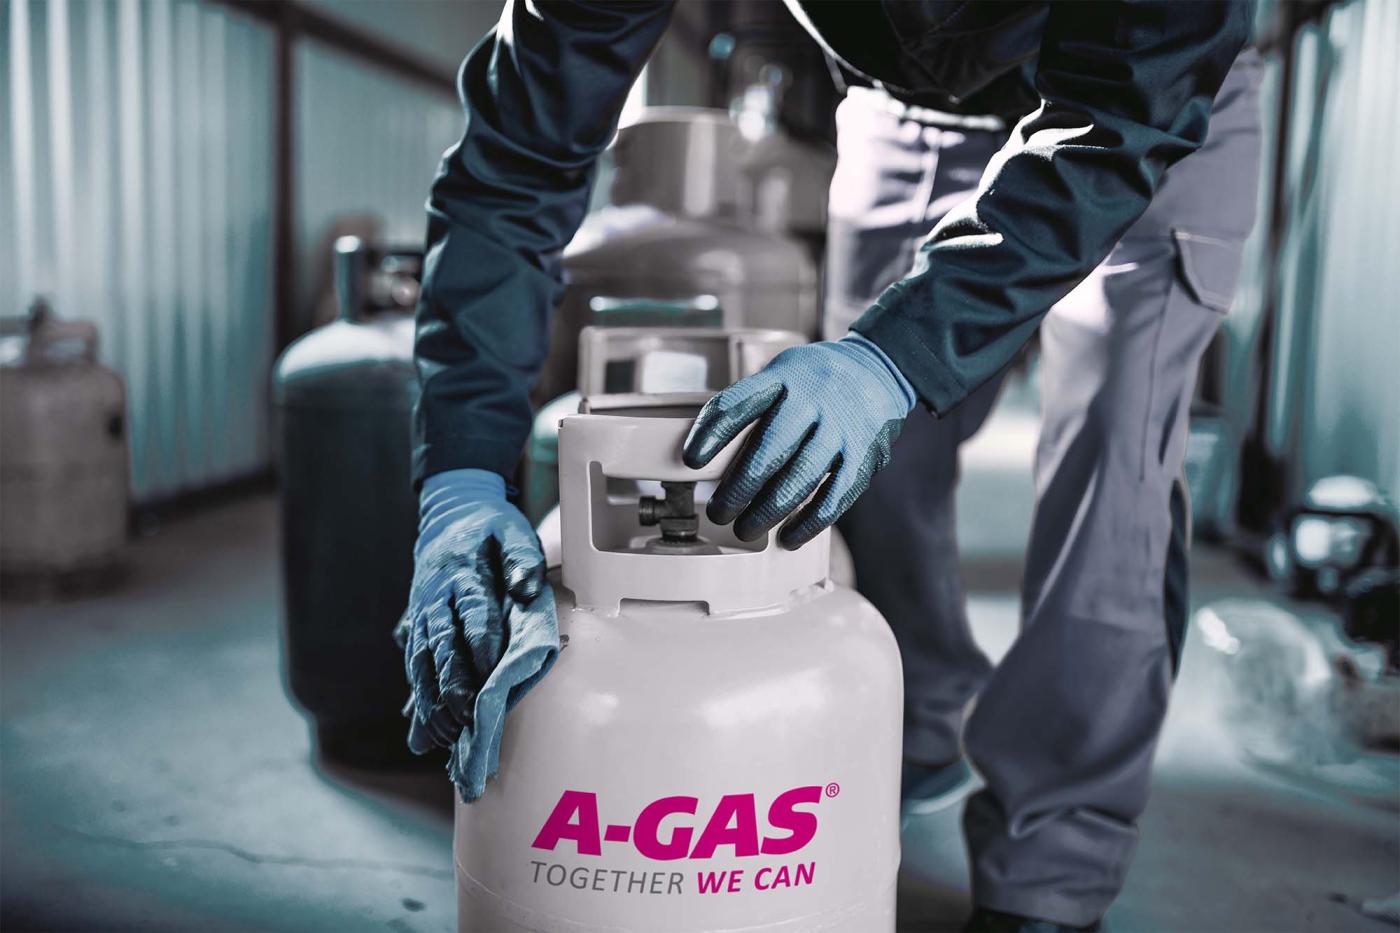 a-gas cylinder image